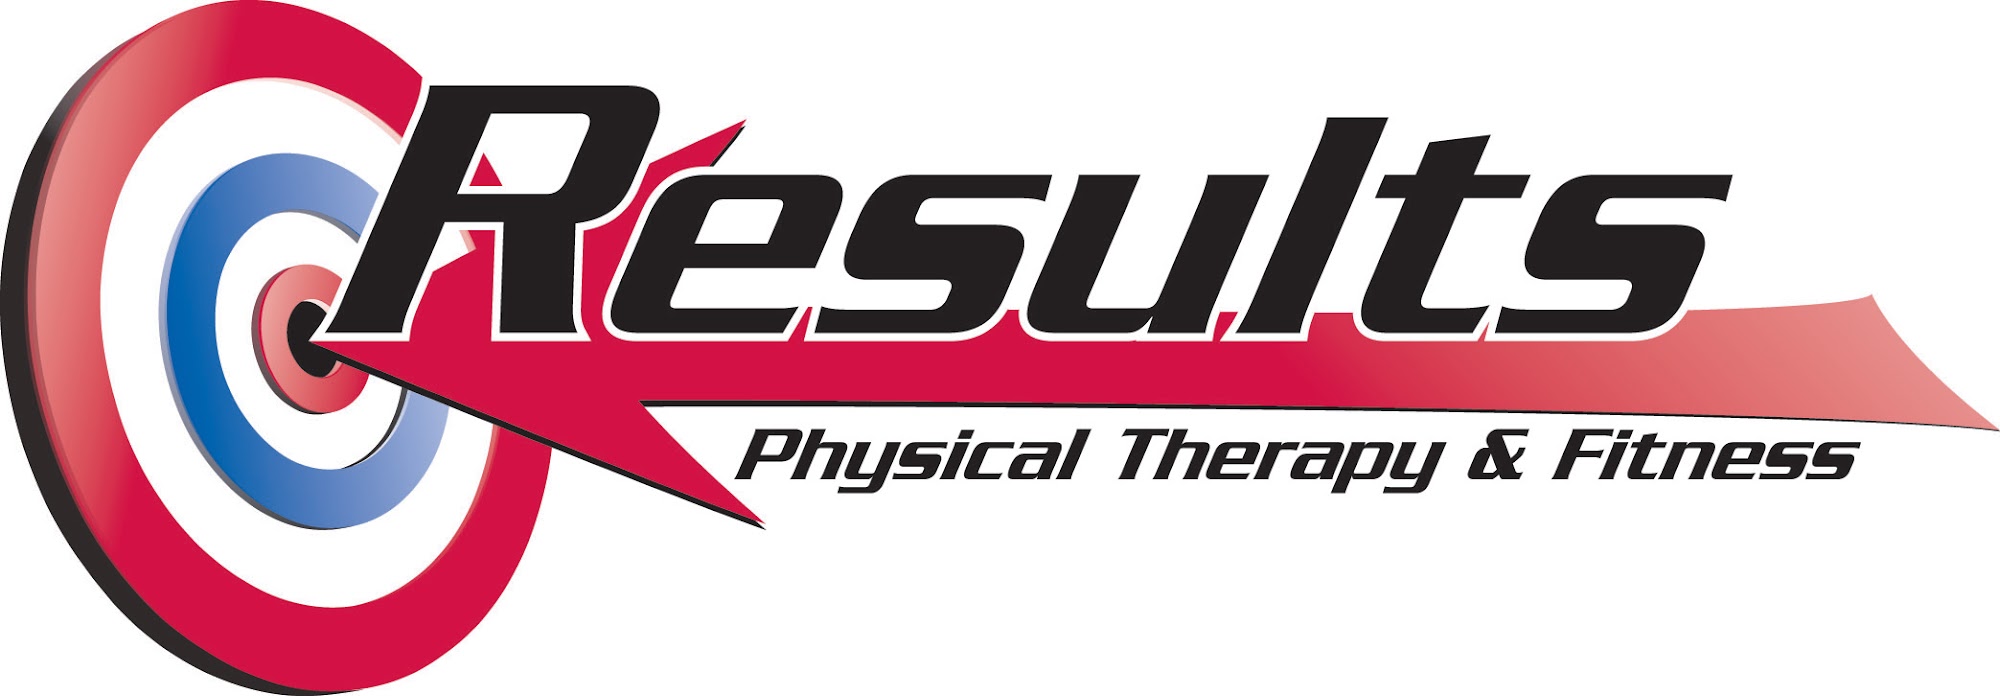 Results Physical Therapy and Fitness 312 N Sterling St, Streator Illinois 61364